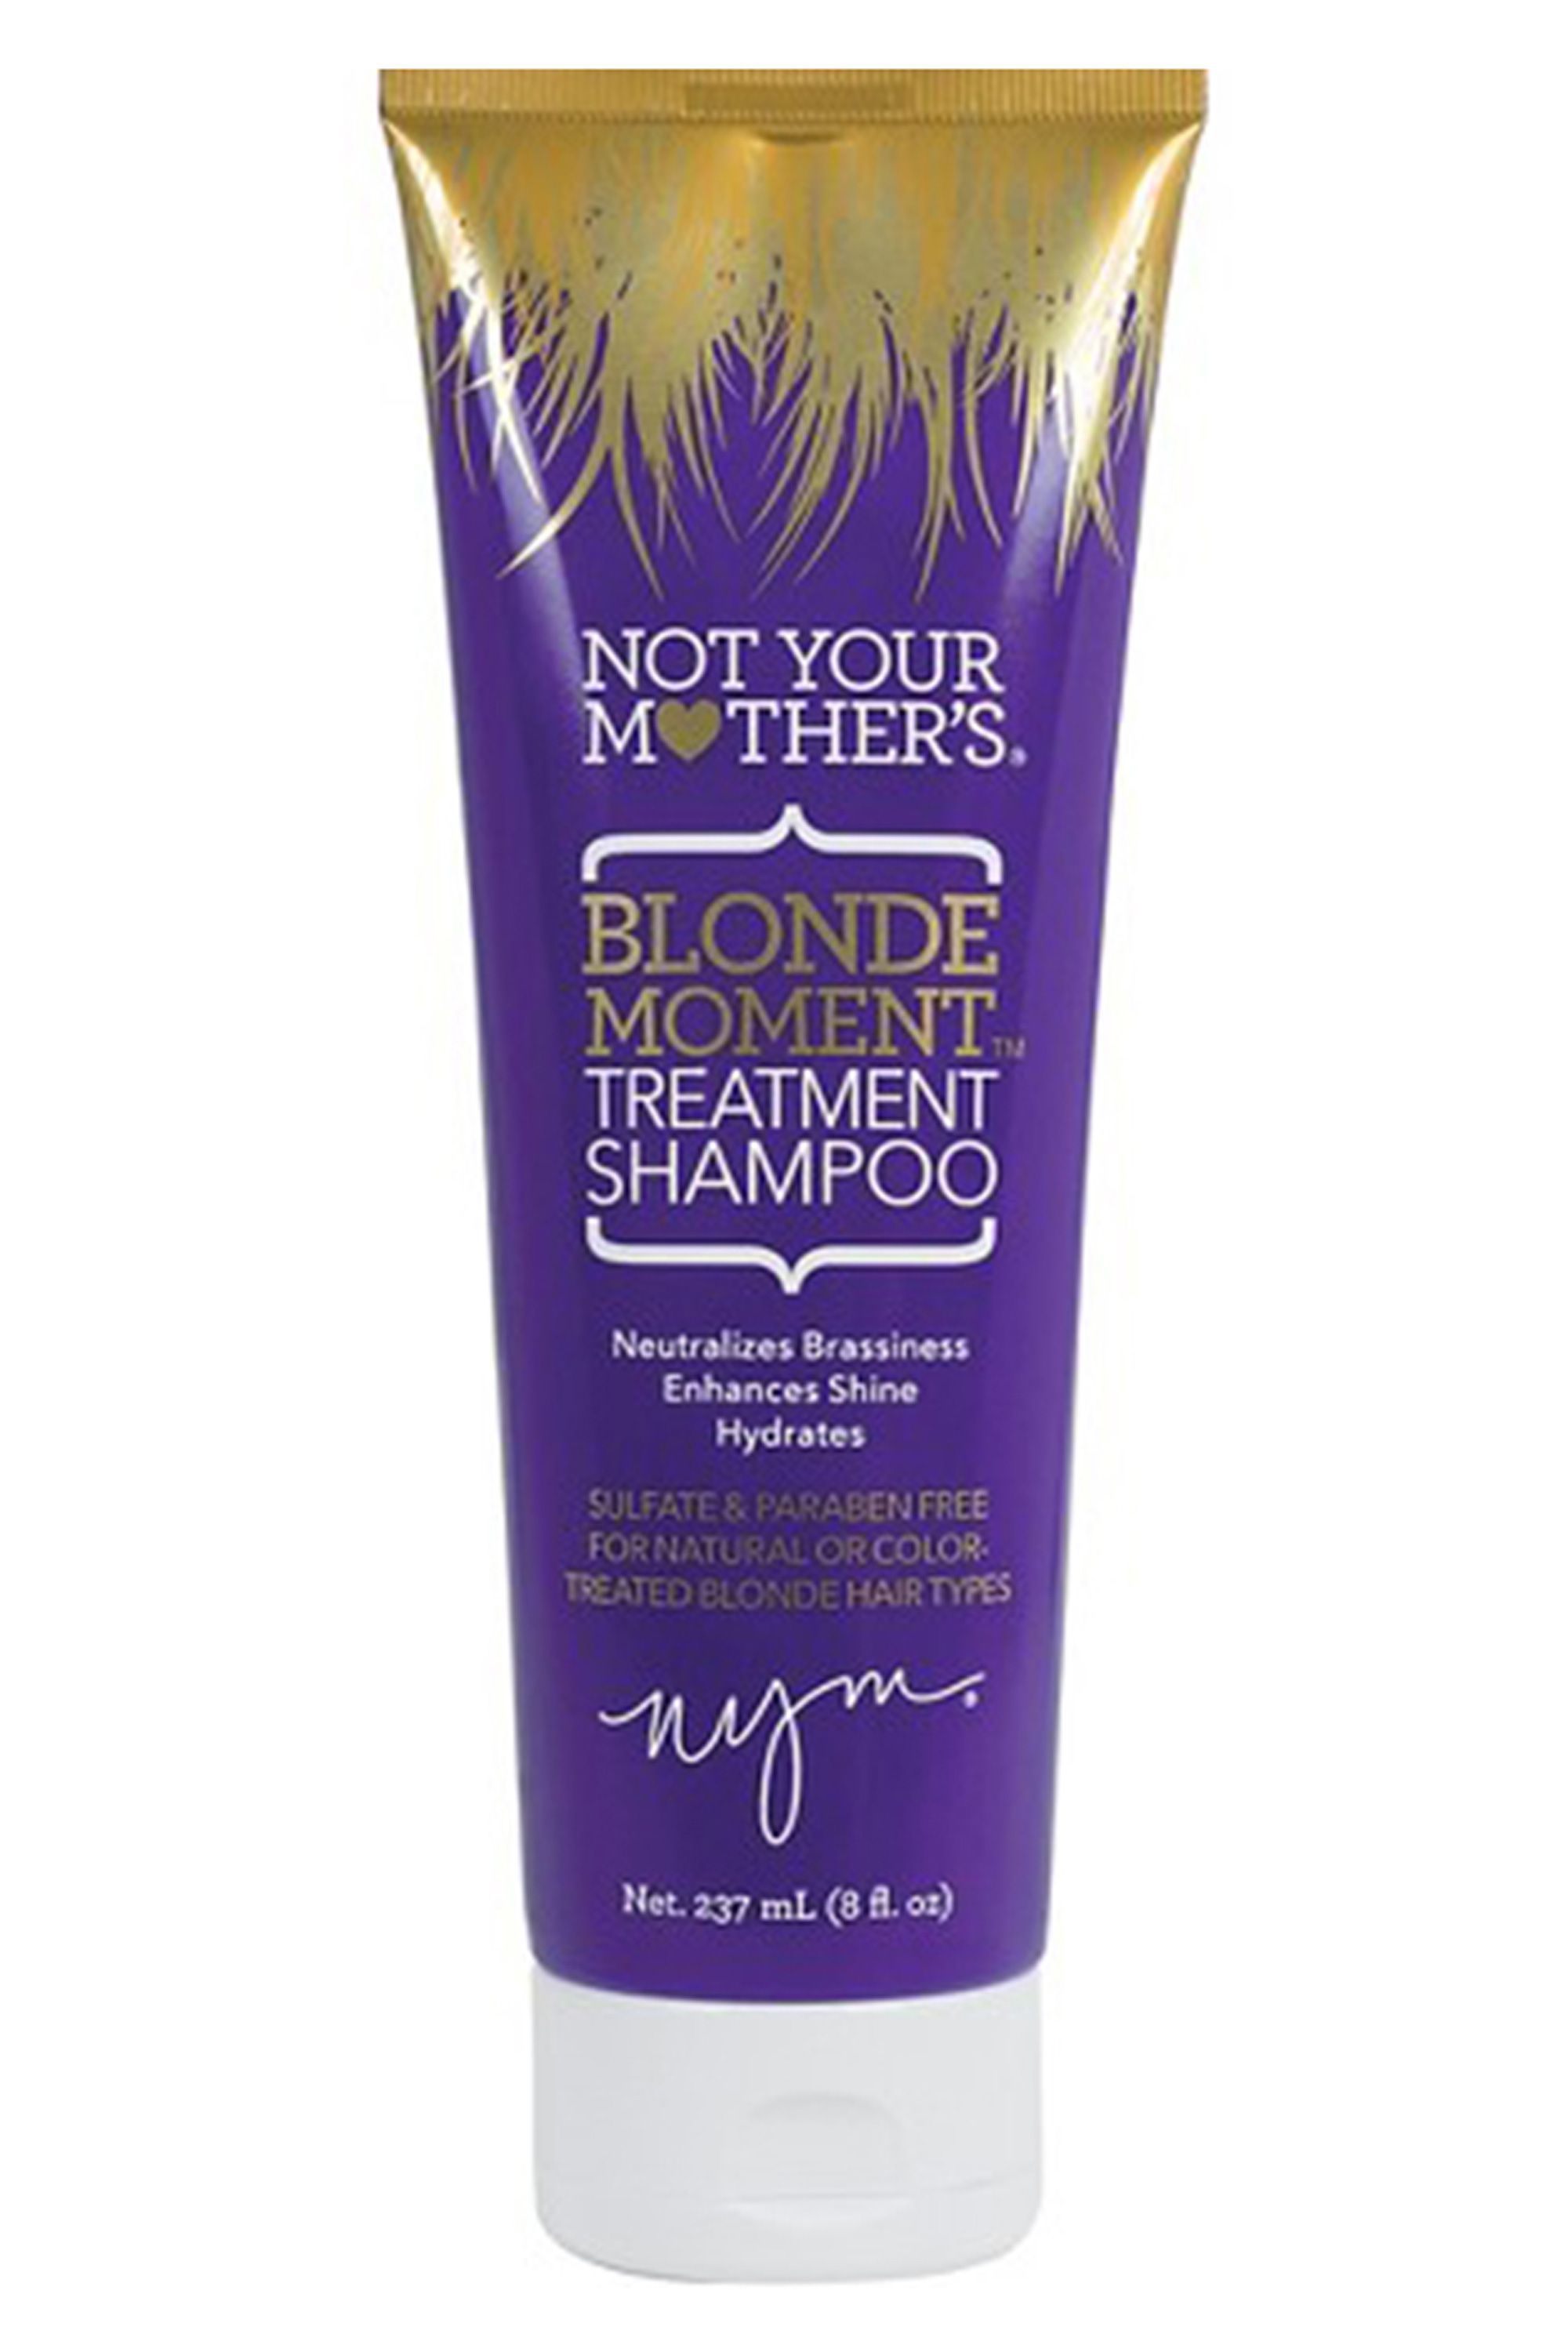 20 Best Purple Shampoos Of 2020 Shampoos For Blonde Hair